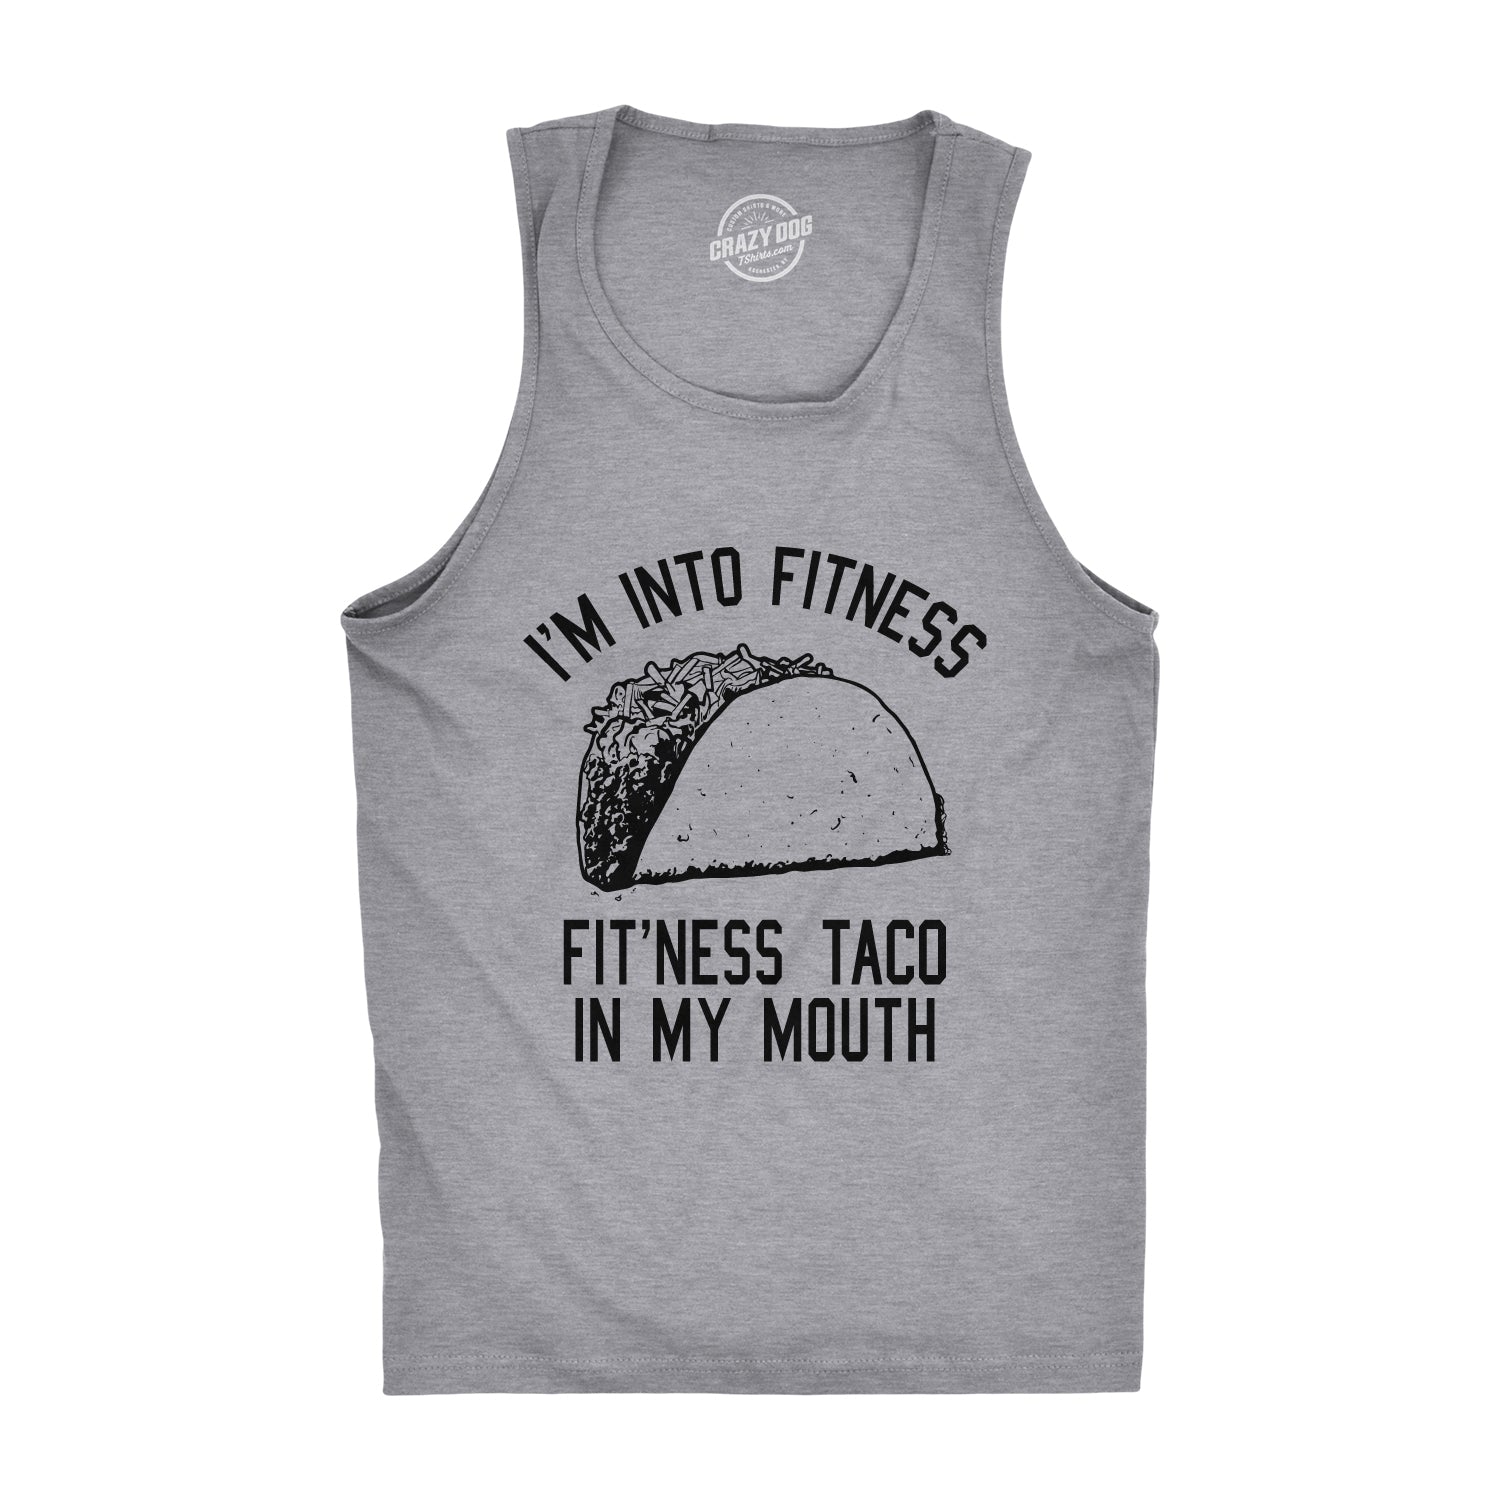 Funny Light Heather Grey - Fitness Taco I'm Into Fitness Fit'ness Taco In My Mouth Mens Tank Top Nerdy Cinco De Mayo Fitness Tee